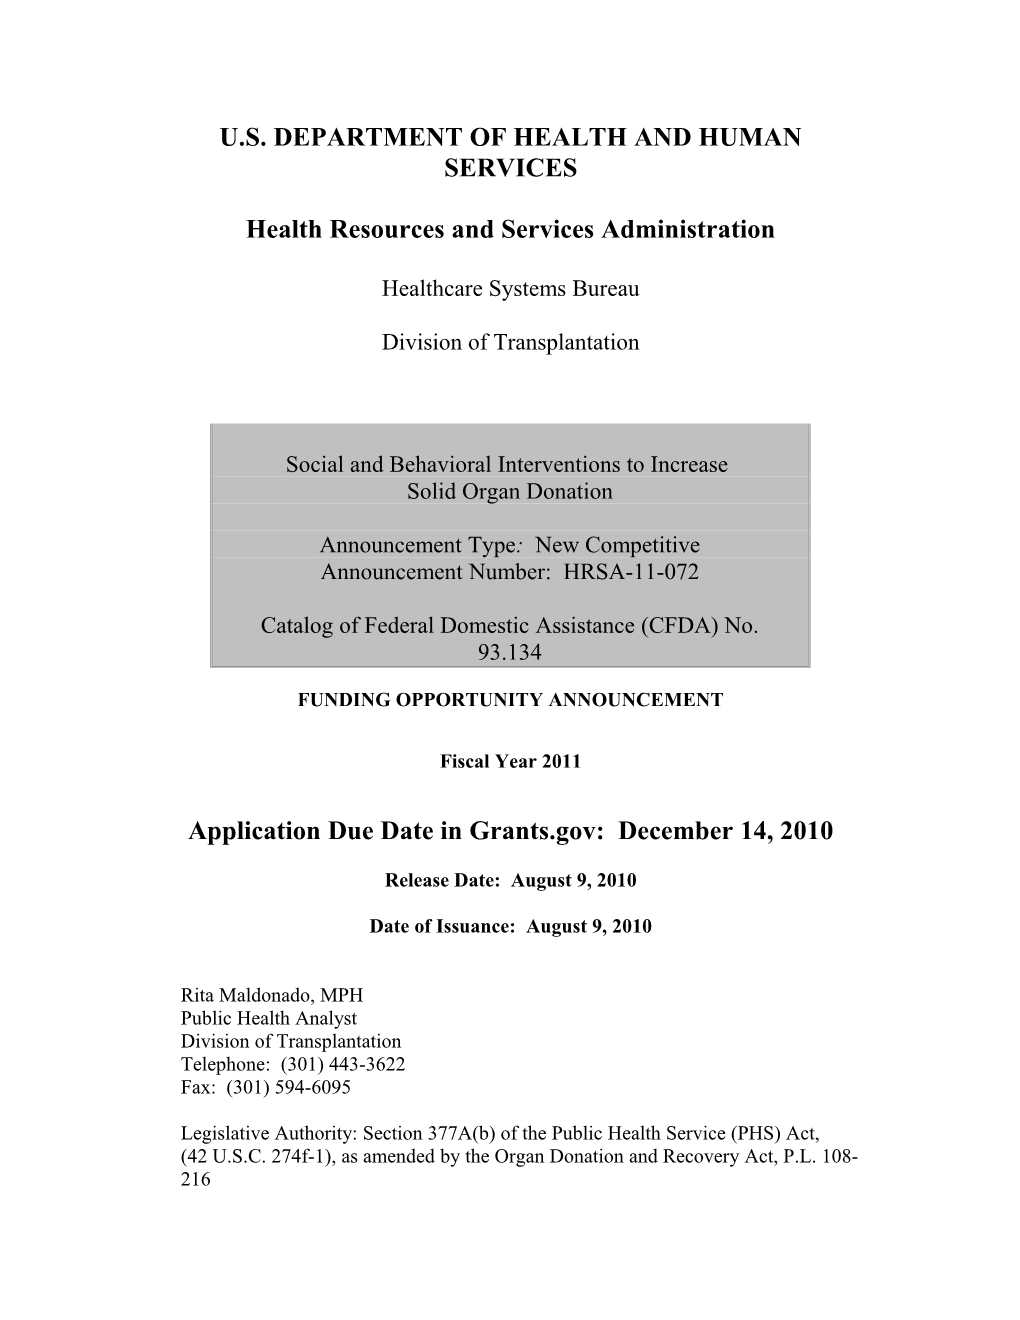 U.S. Department of Health and Human Services s14